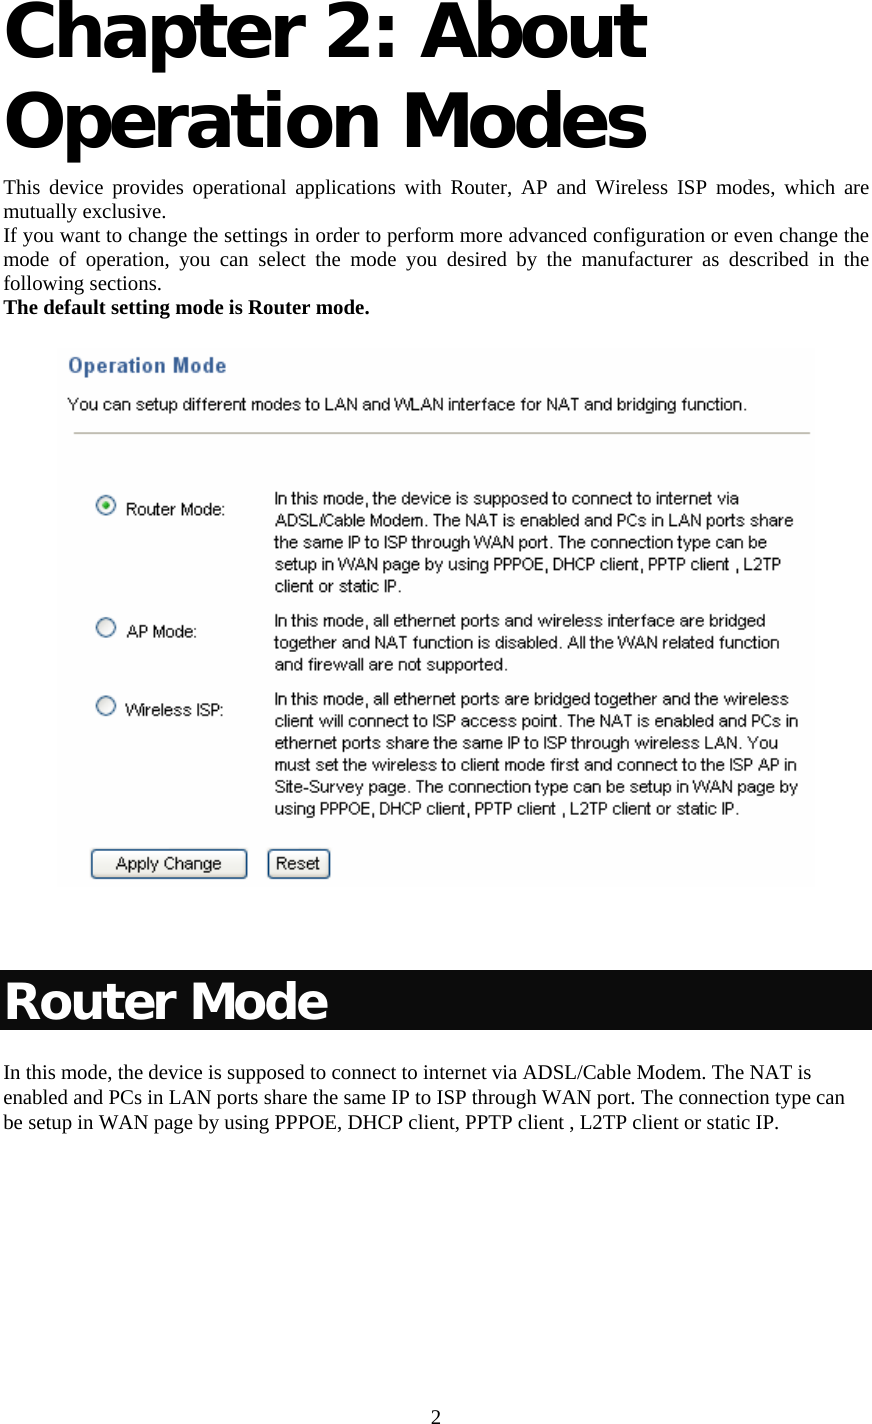     2 Chapter 2: About Operation Modes  This device provides operational applications with Router, AP and Wireless ISP modes, which are mutually exclusive.  If you want to change the settings in order to perform more advanced configuration or even change the mode of operation, you can select the mode you desired by the manufacturer as described in the following sections. The default setting mode is Router mode.   Router Mode In this mode, the device is supposed to connect to internet via ADSL/Cable Modem. The NAT is enabled and PCs in LAN ports share the same IP to ISP through WAN port. The connection type can be setup in WAN page by using PPPOE, DHCP client, PPTP client , L2TP client or static IP.  